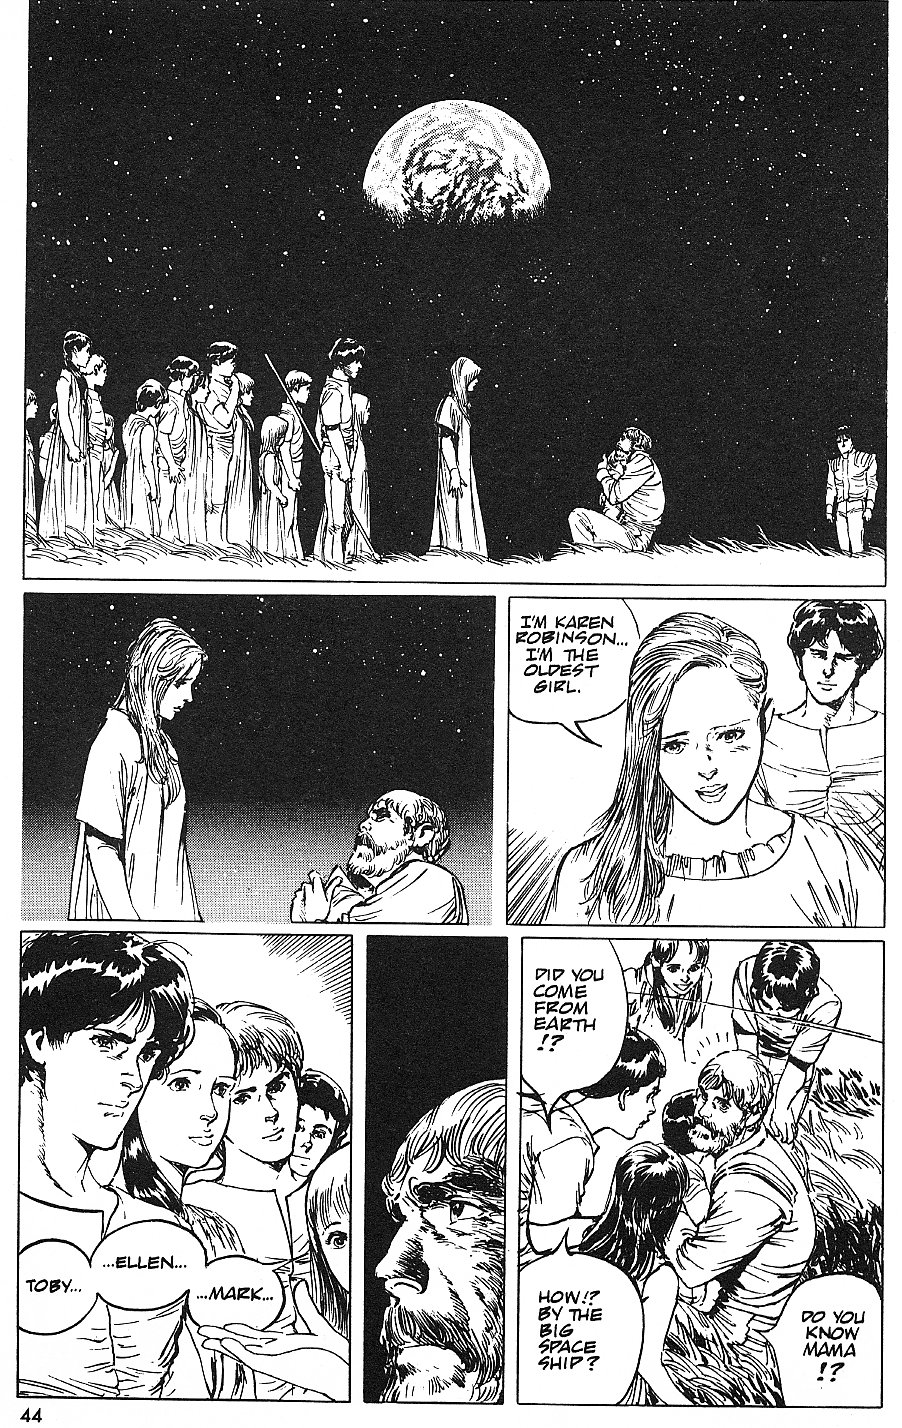 2001 Nights Vol. 3 Ch. 19 Children of the Earth